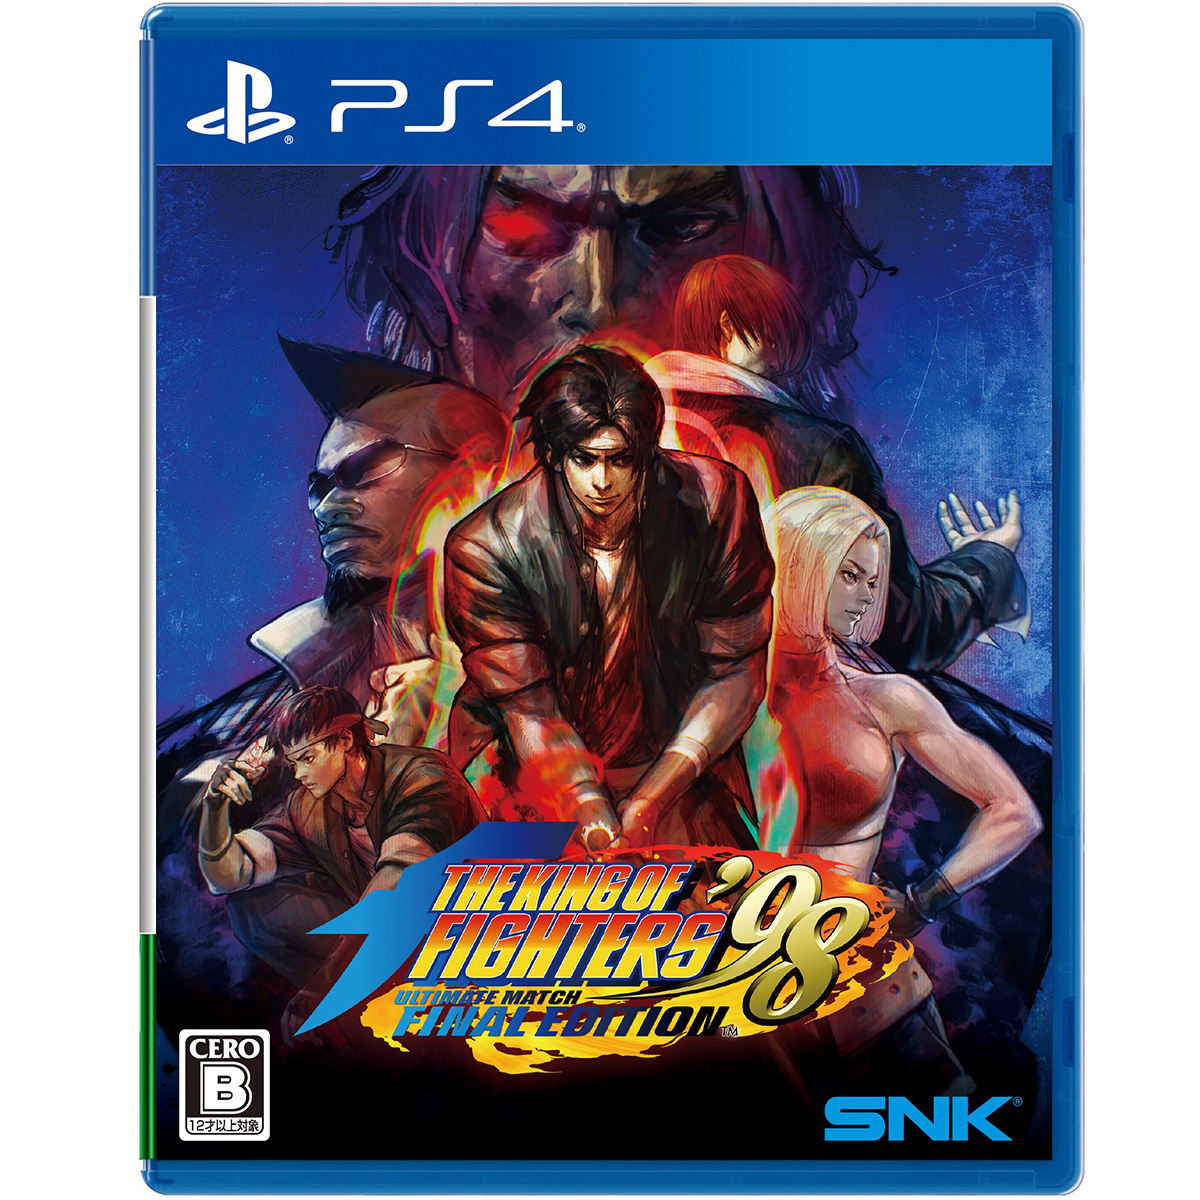 ［PS4］ THE KING OF FIGHTERS ’98 ULTIMATE MATCH FINAL EDITION ザ・キング・オブ・ファイターズ 98 アルティメットマッチ ファイナルエディション